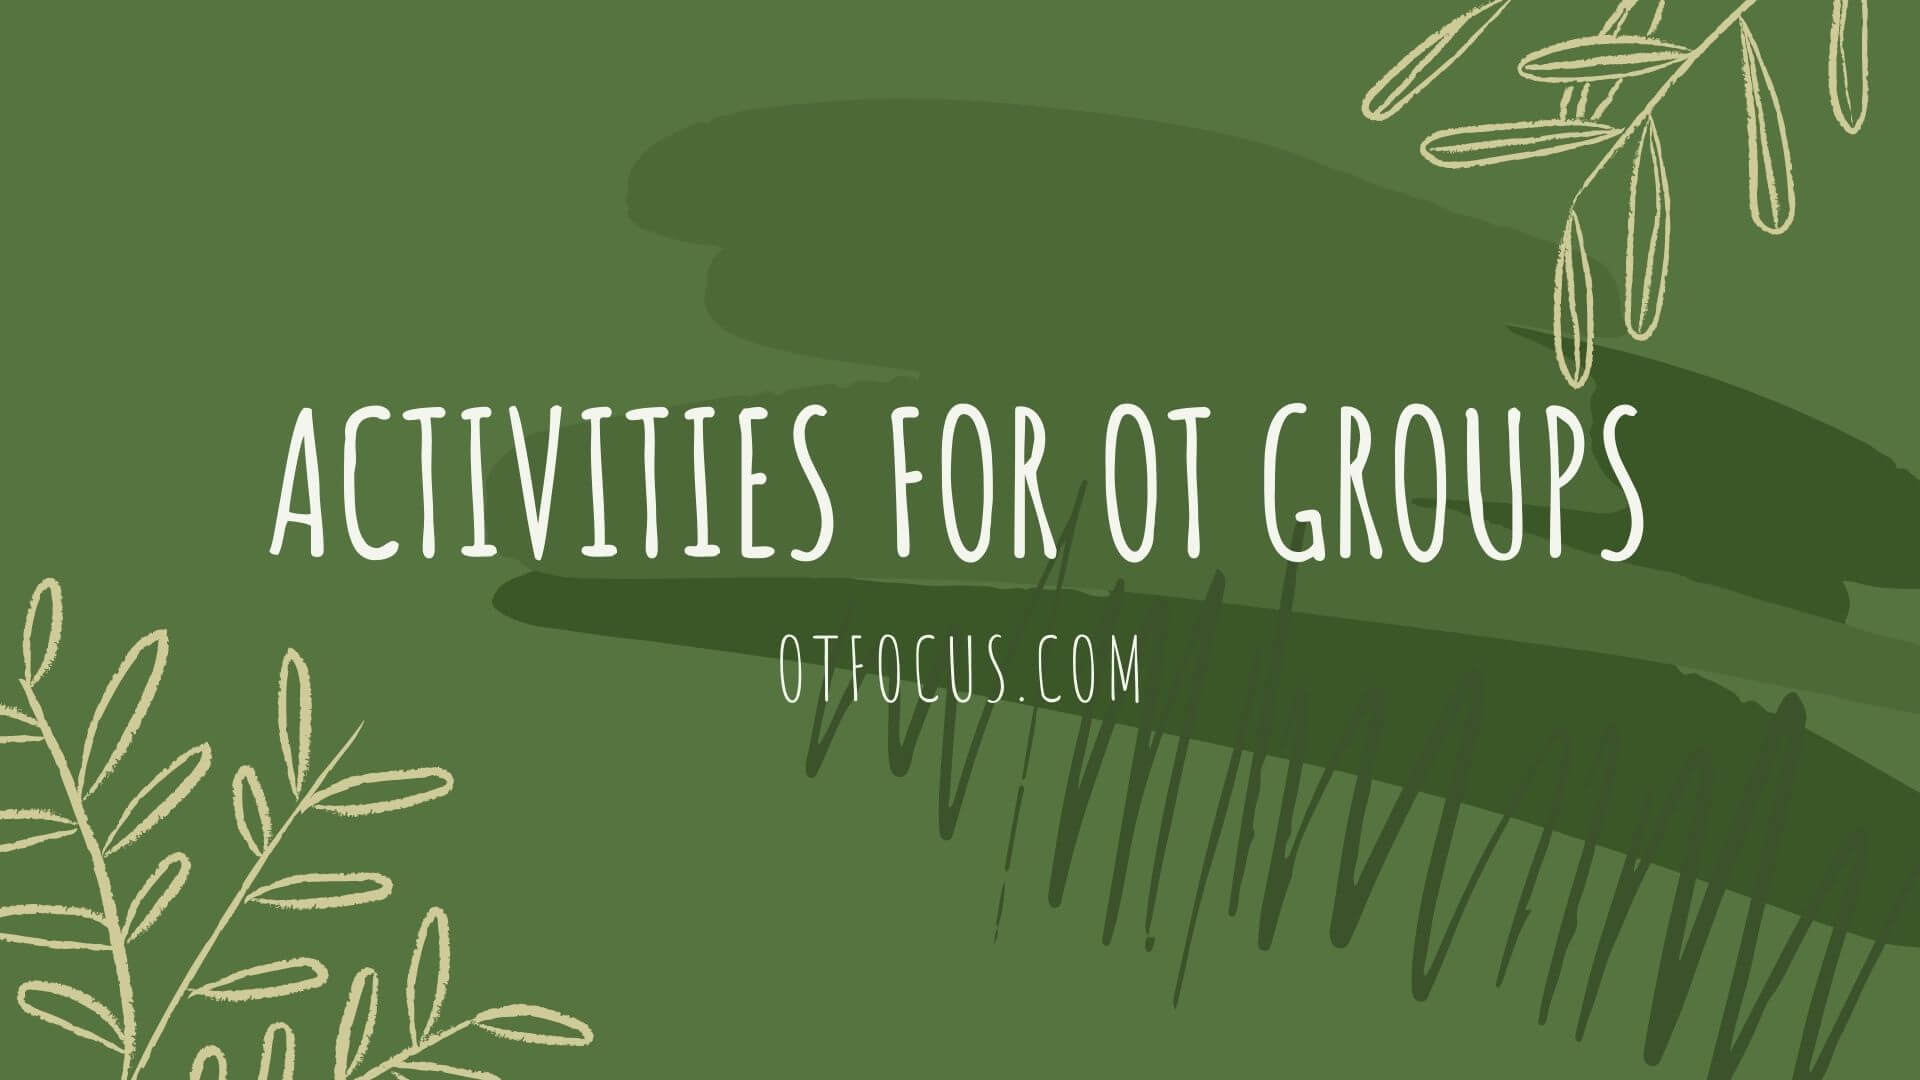 6 Types of Activity Groups Free Trial - Pass The OT